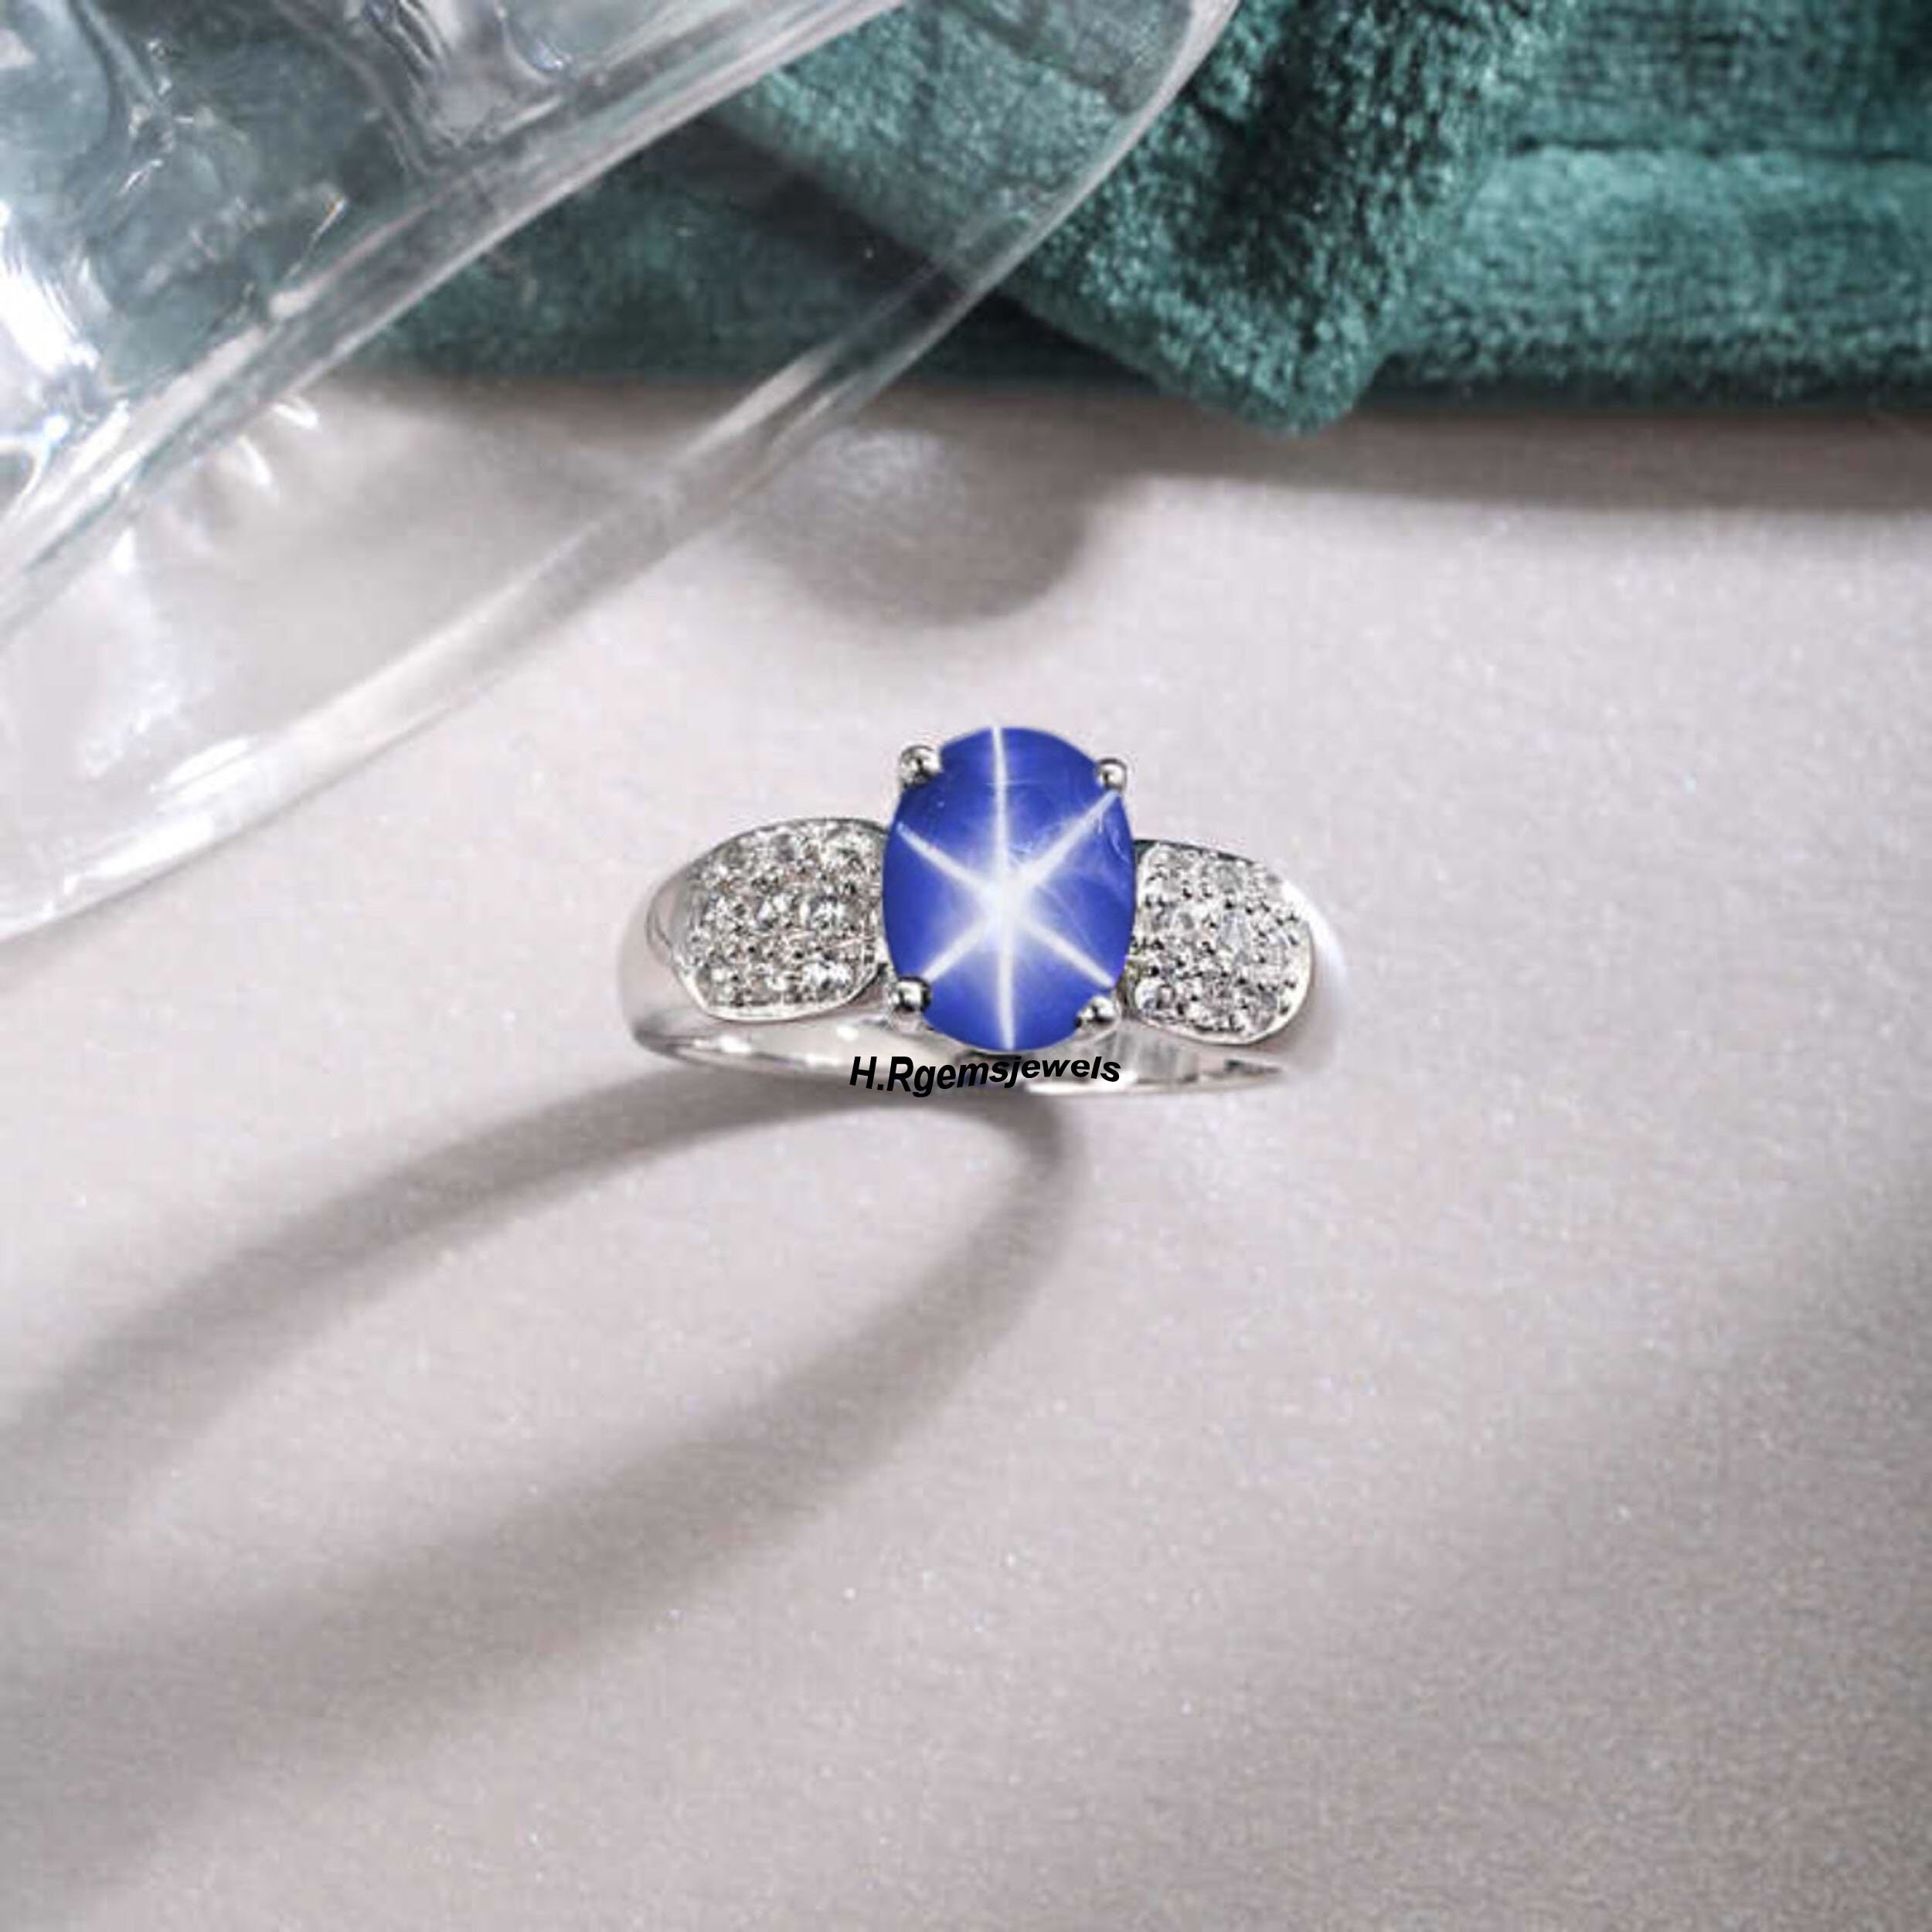 Buy Genuine Blue Star Sapphire Ring 925 Sterling Silver / Blue Star  Sapphire Ring for Women Online in India - Etsy